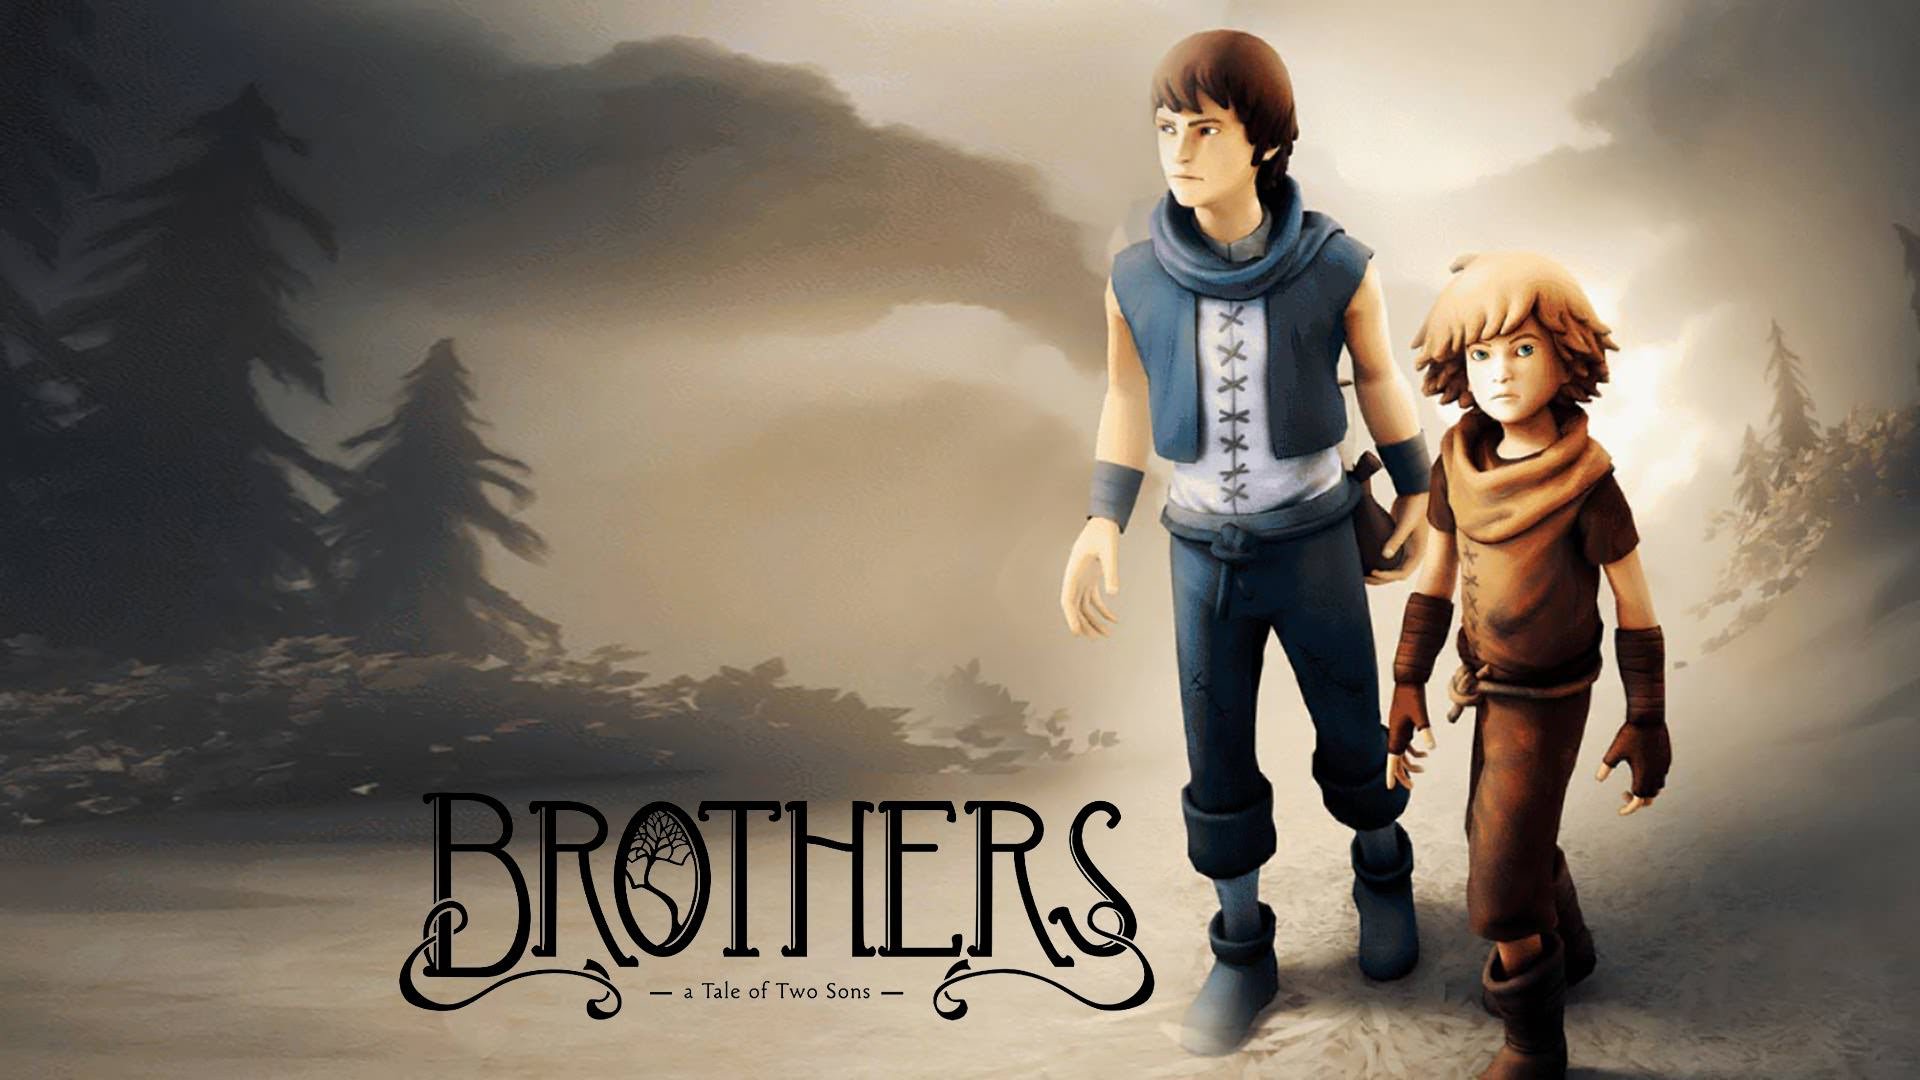 Two brothers in Brothers: A Tale of Two Sons